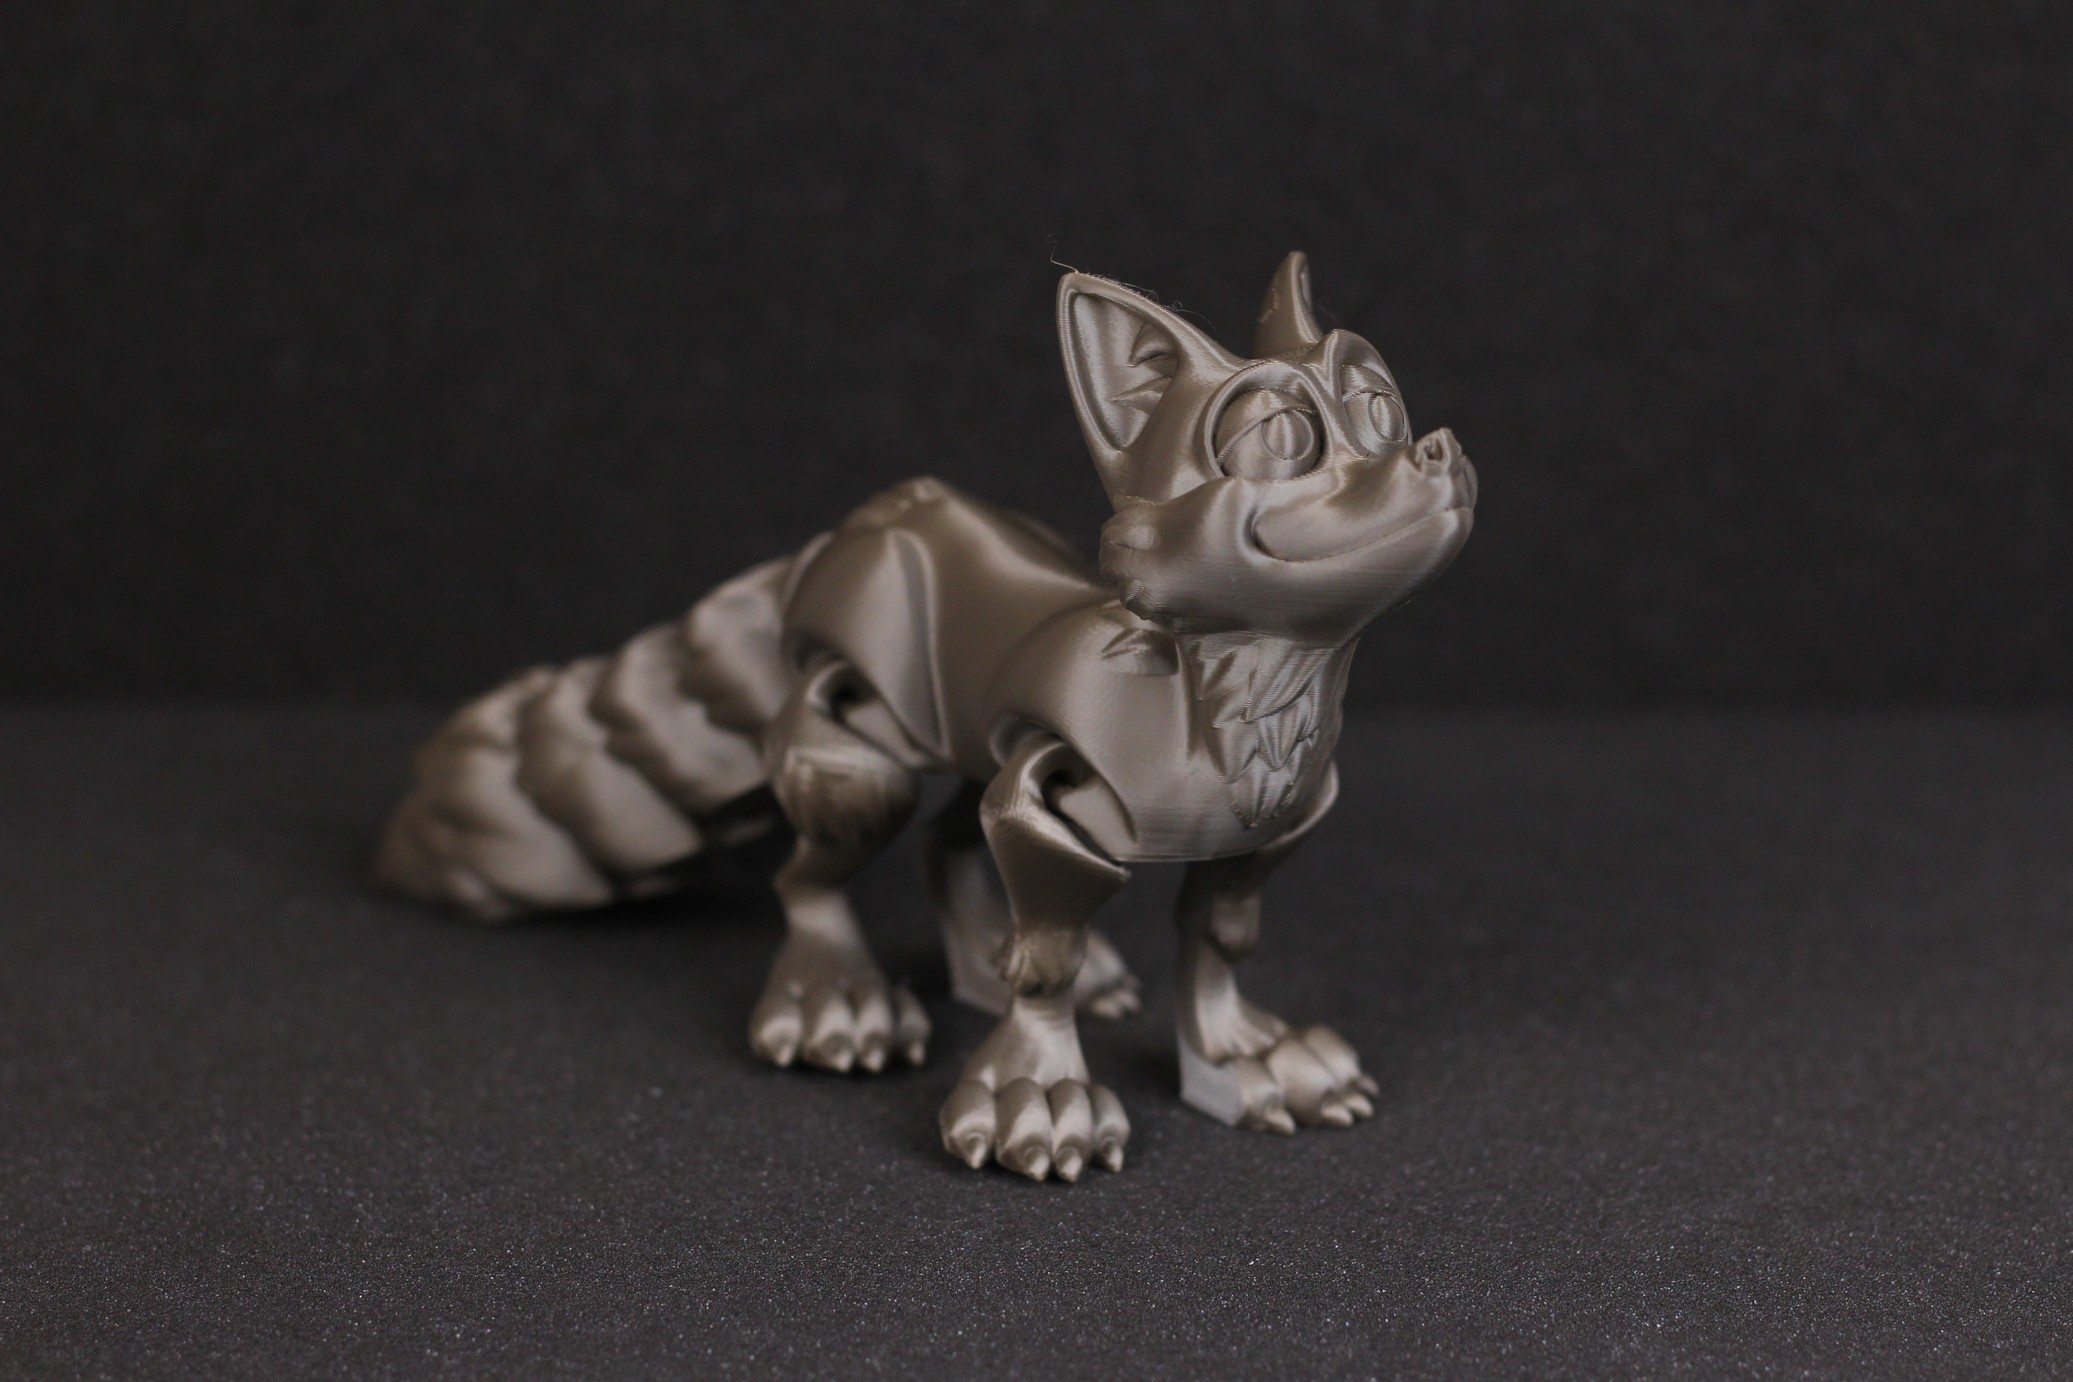 Flexi Fox printed on Ender 3 S1 2 | Creality Ender 3 S1 Review: Almost Perfect